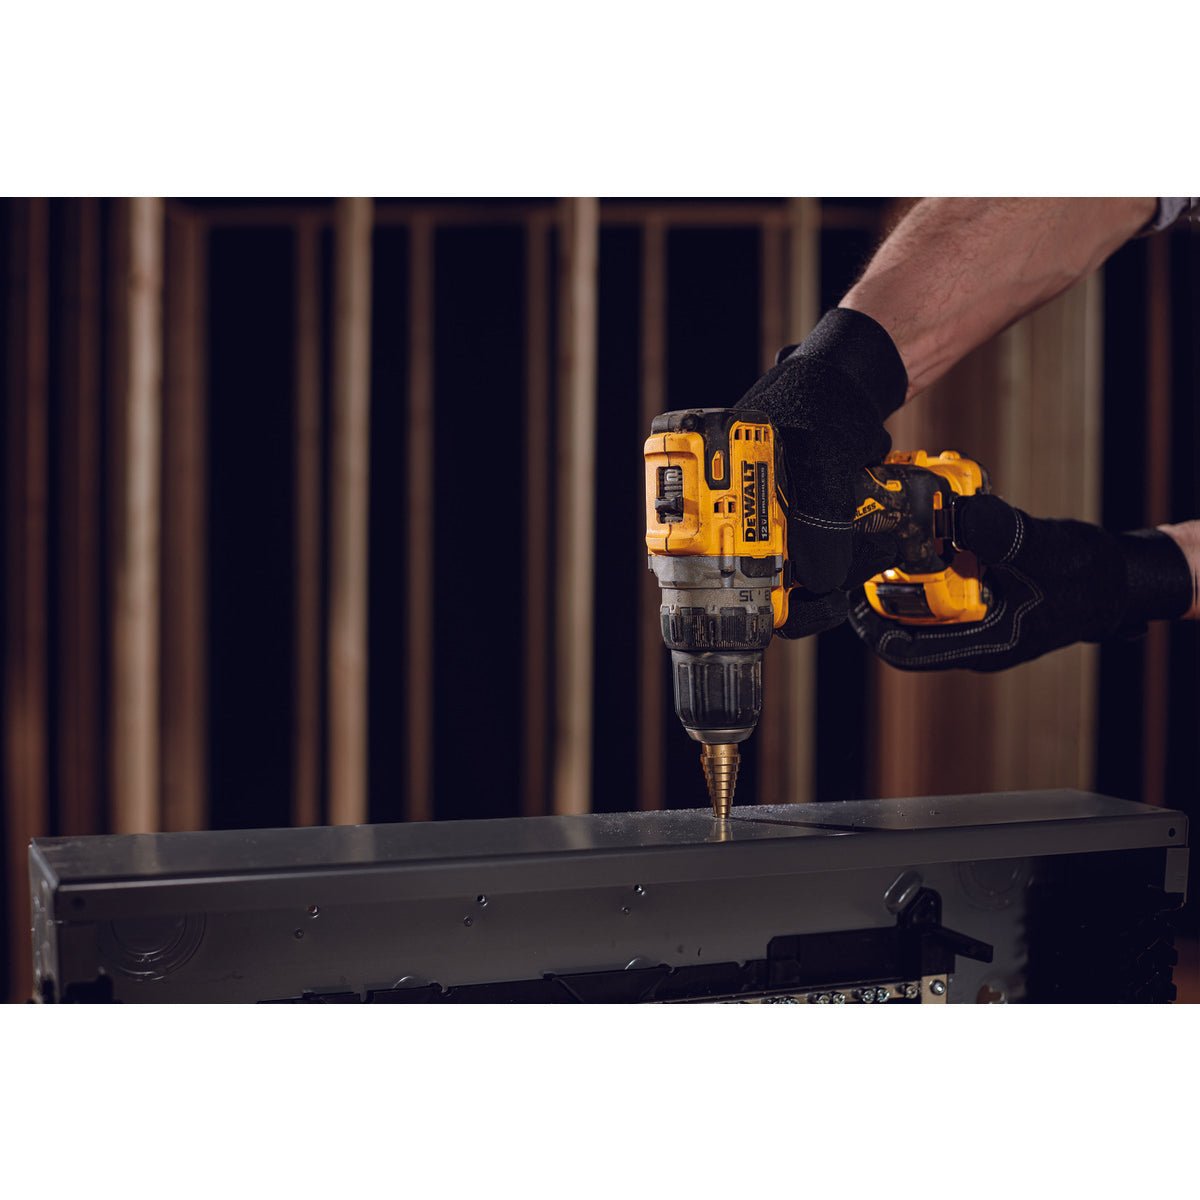 DEWALT DCD701B XTREME™ 12V MAX* BRUSHLESS 3/8 IN. CORDLESS DRILL/DRIVER (TOOL ONLY)